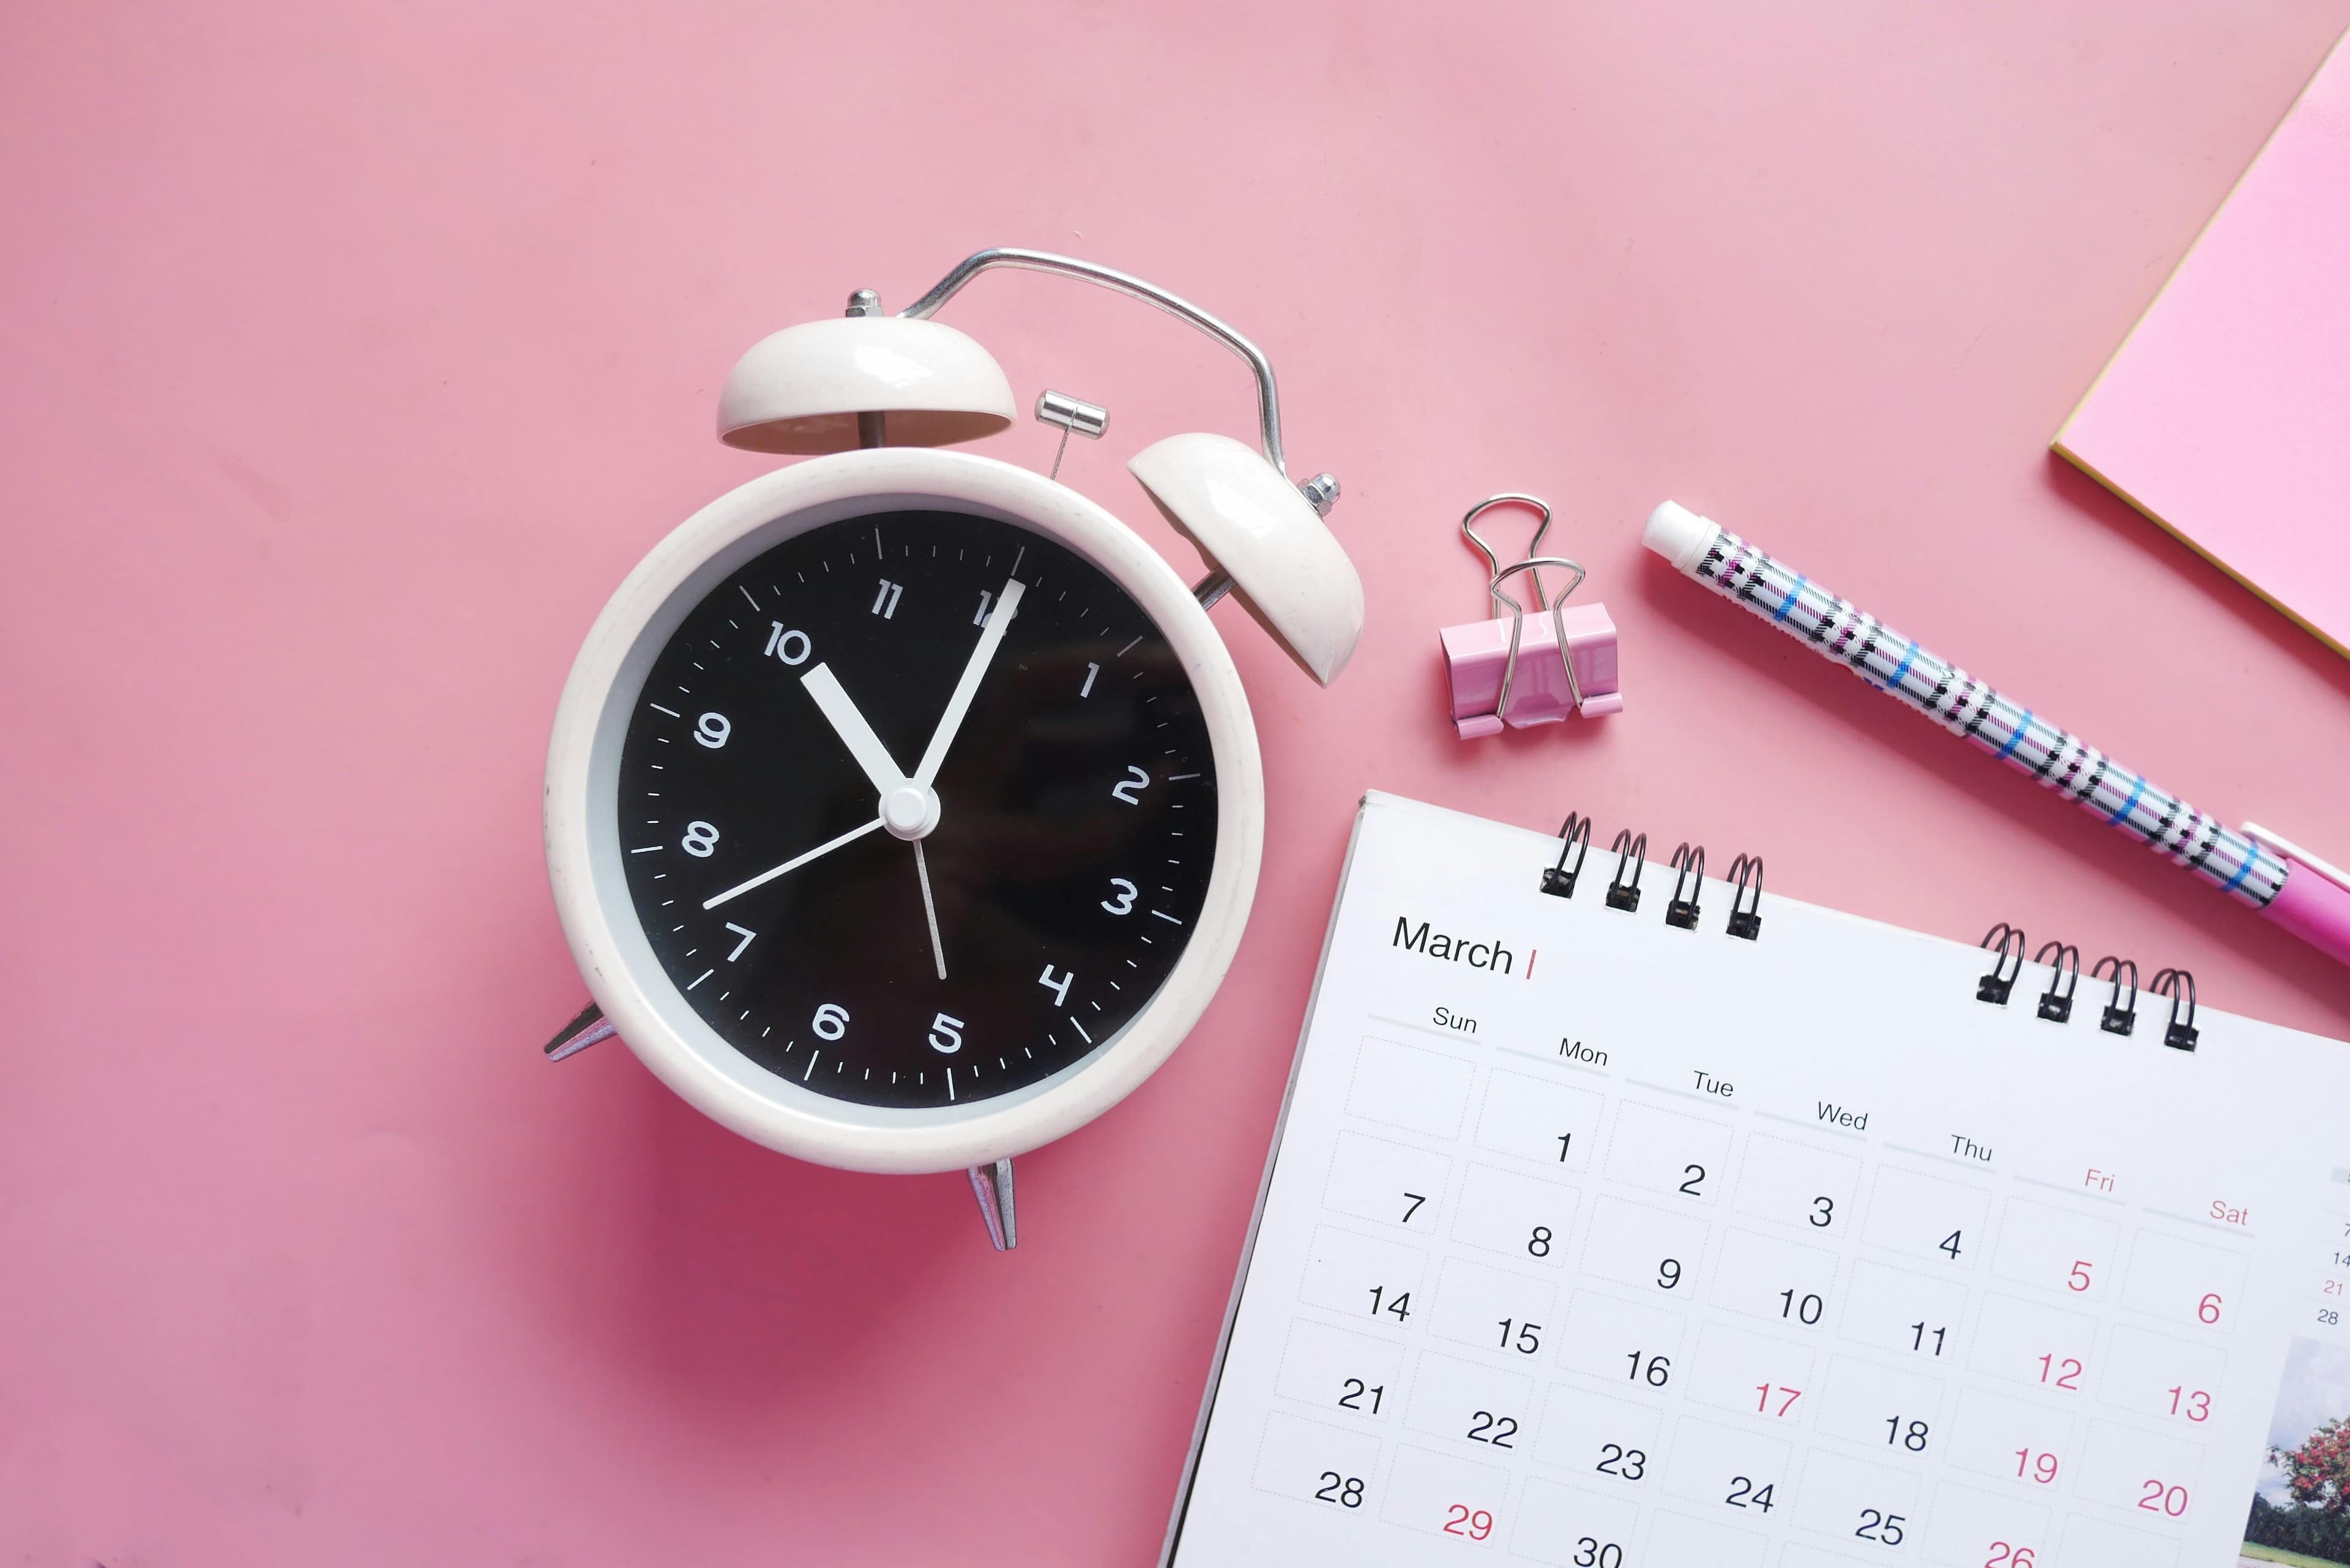 Clock and calendar on pink backdrop